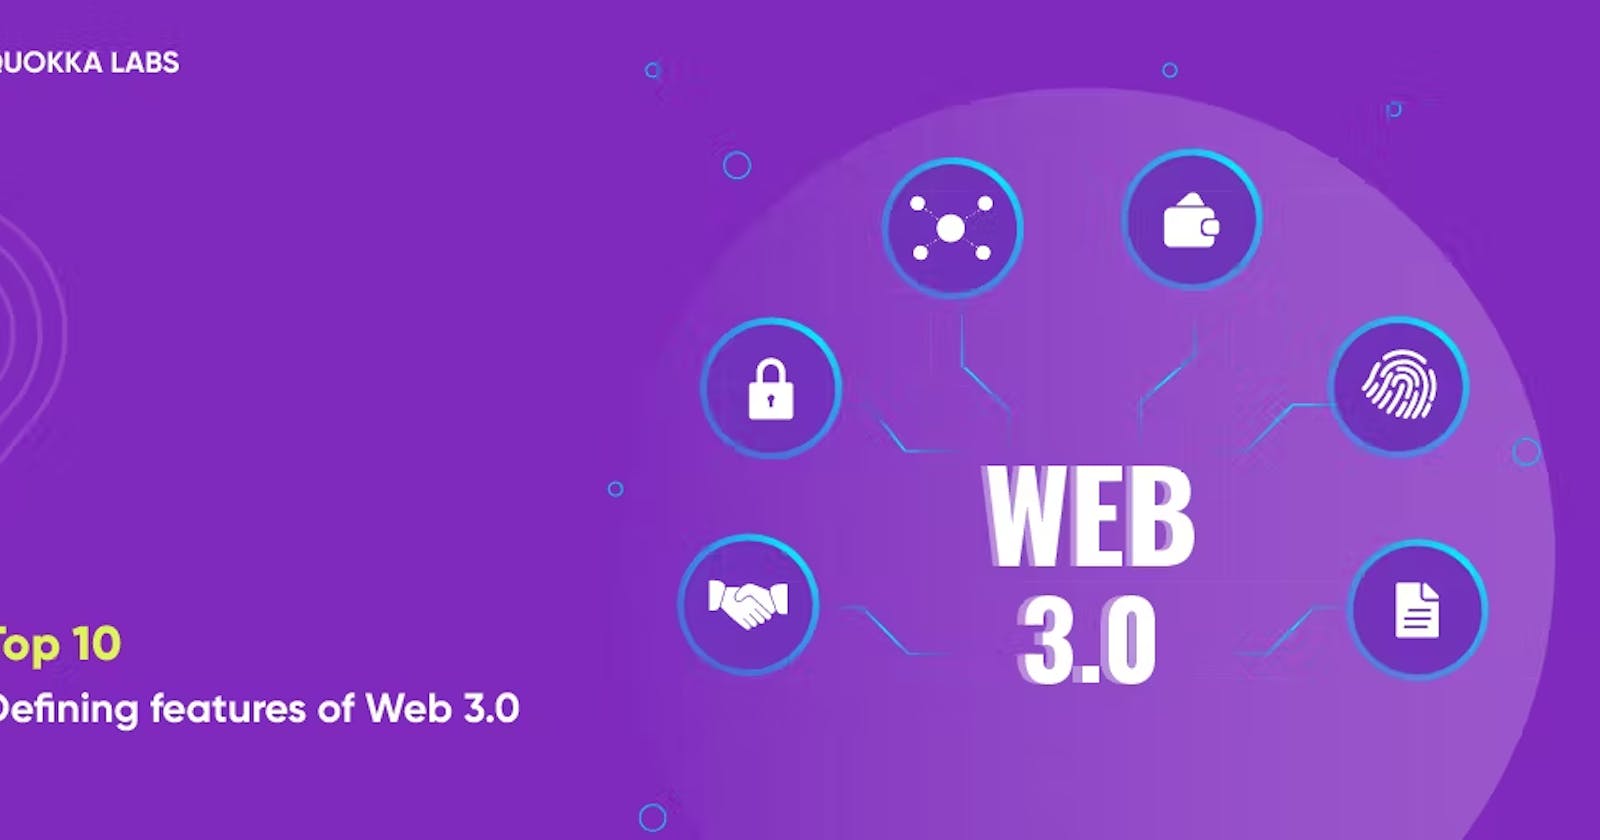 Top 10 Defining Features of Web 3.0